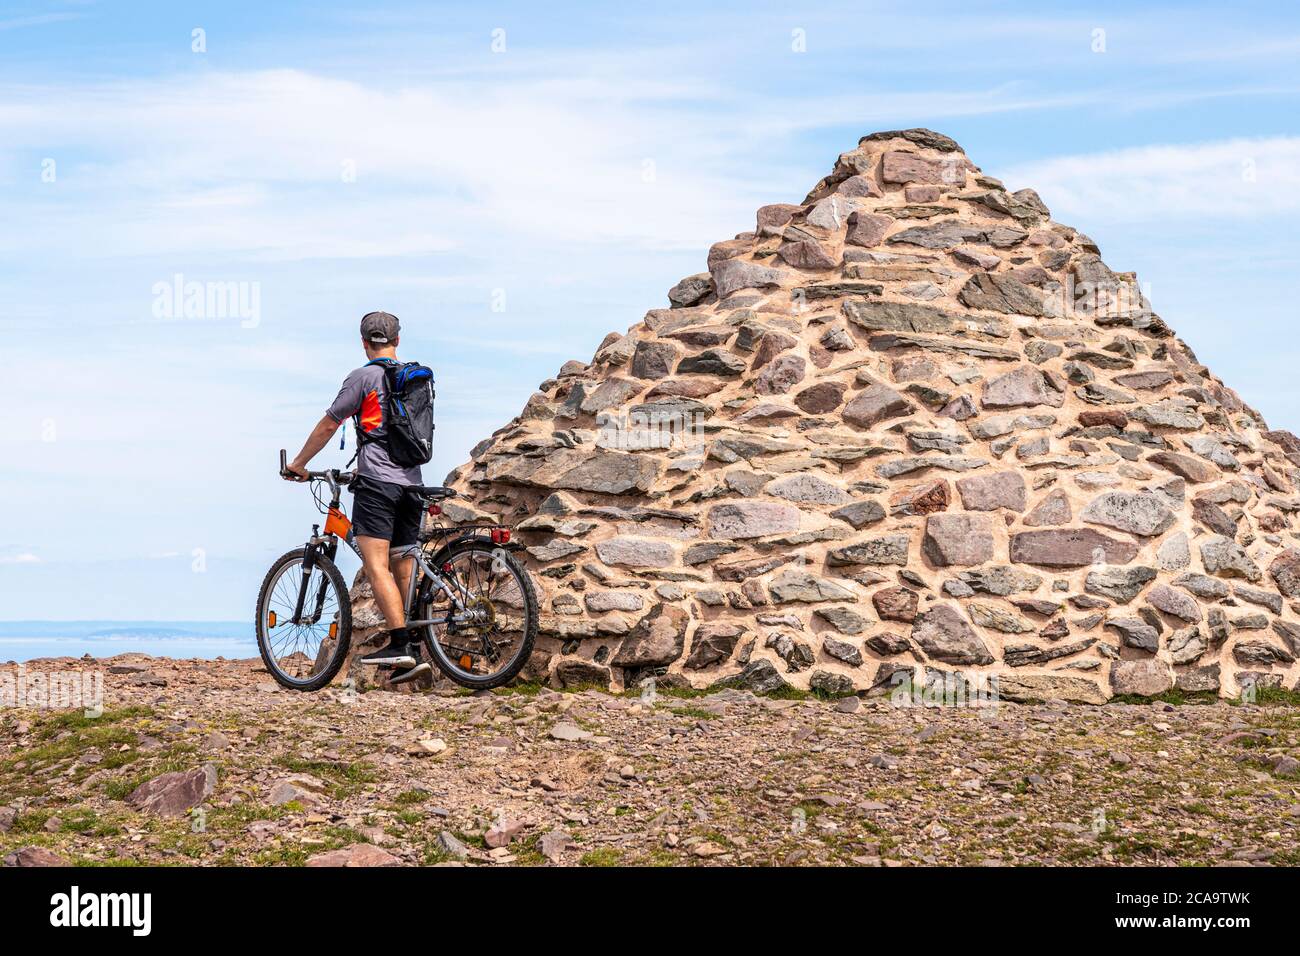 Exmoor National Park - A mountain biker enjoying the view from the cairn marking the highest point on Exmoor, Dunkery Beacon 1705 feet 520 metres, Som Stock Photo